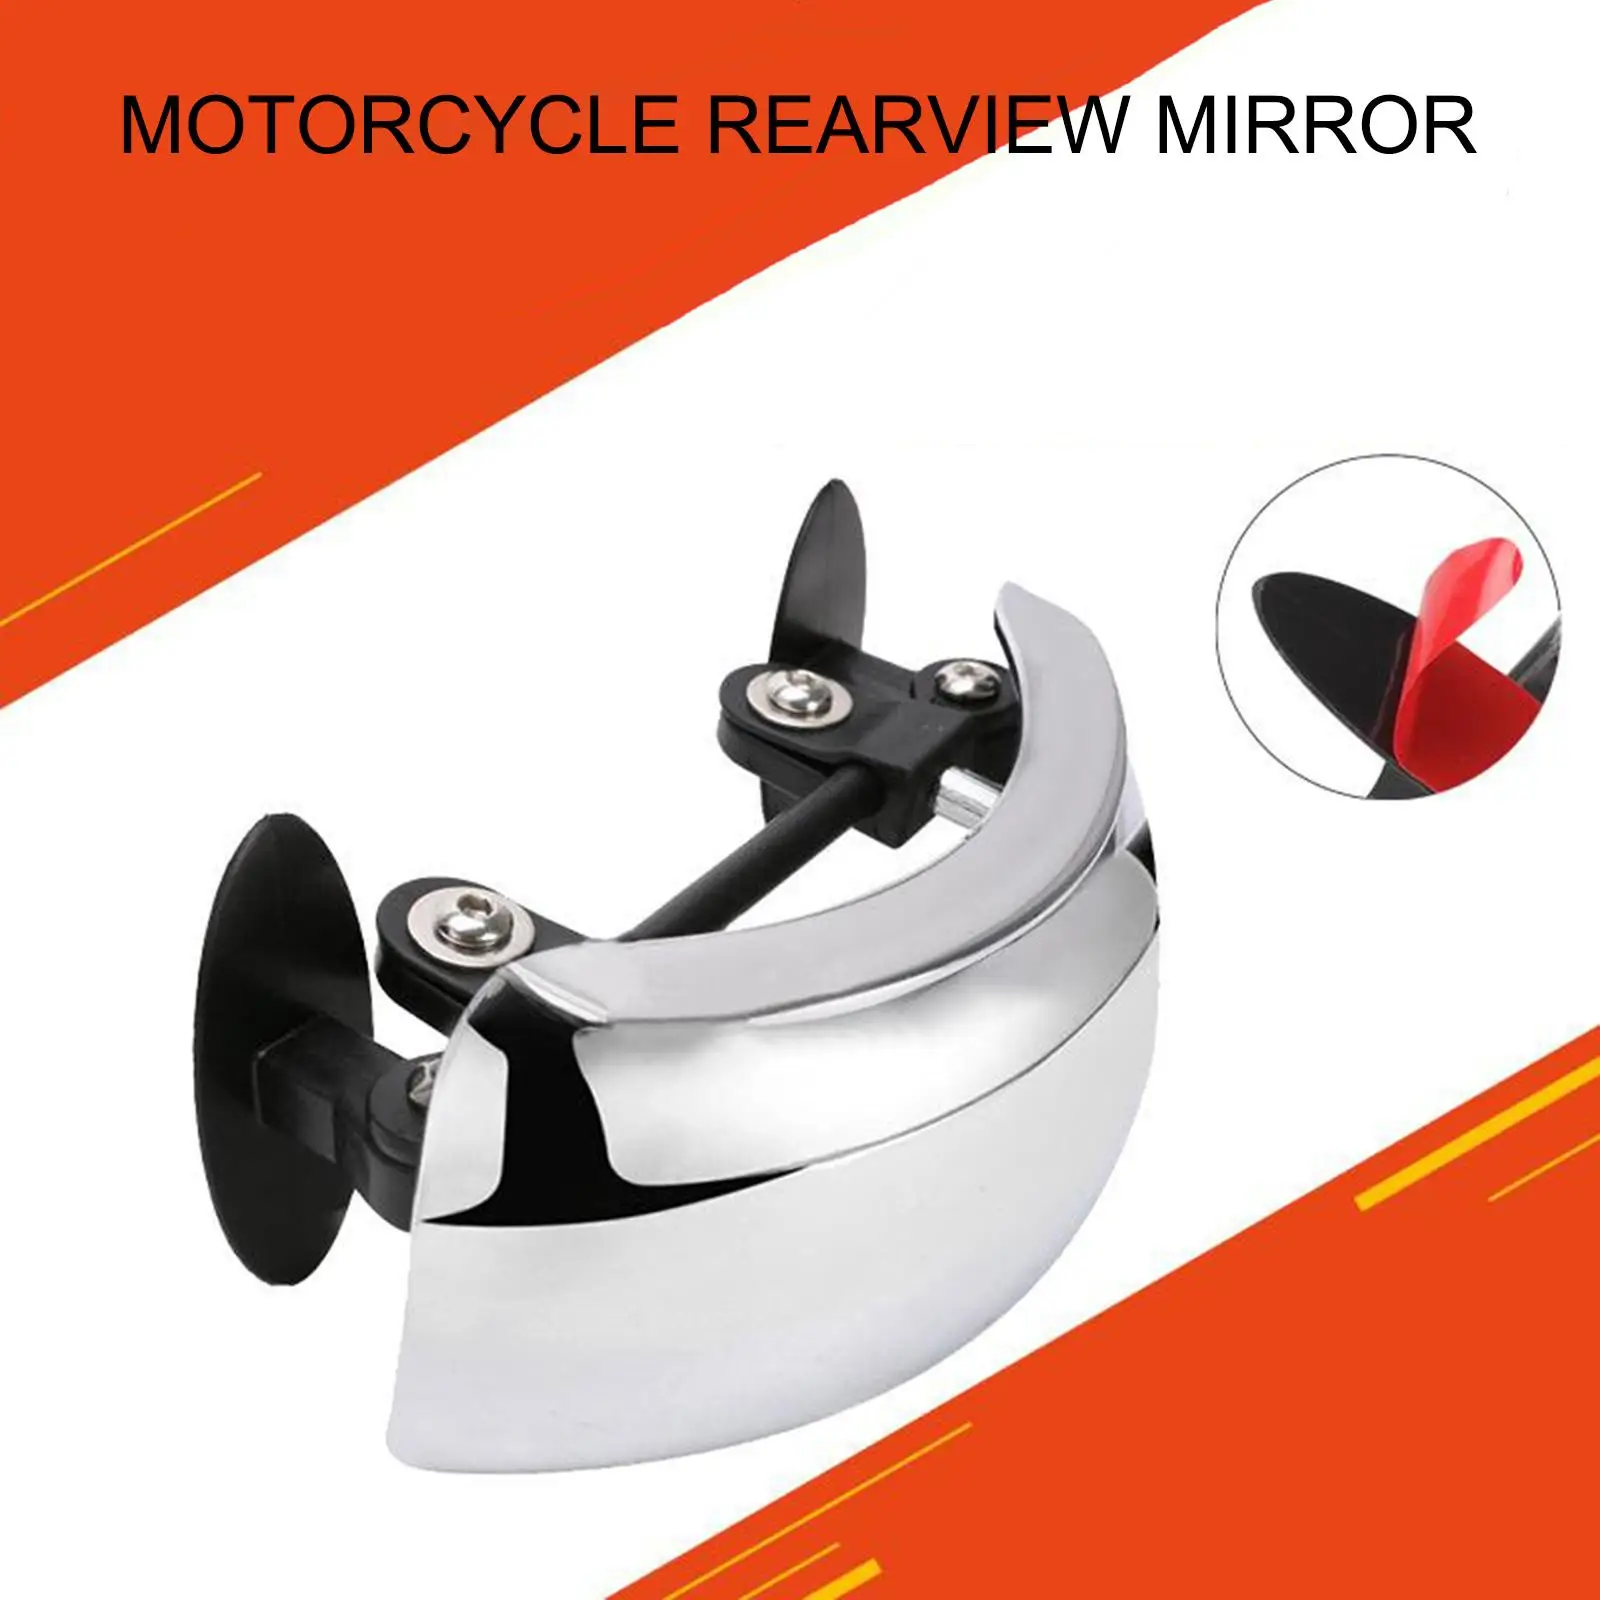 MotorbikeRearview Mirrors  Safety Wide-angle Lens Rear View 